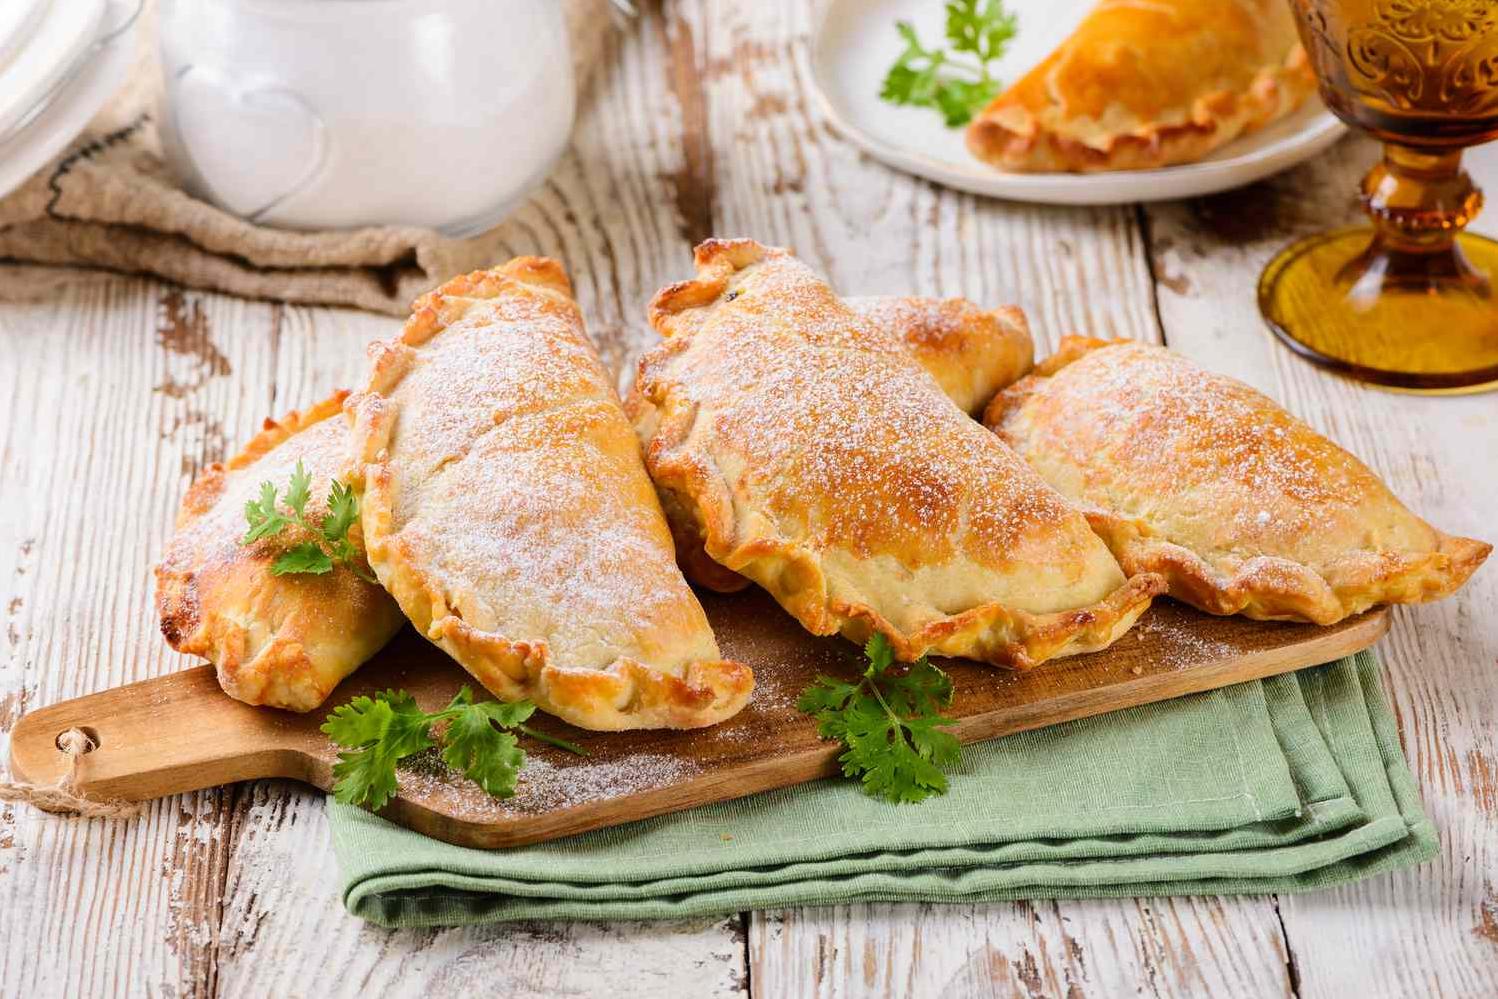  The classic beauty of empanadas with a vegetarian twist!